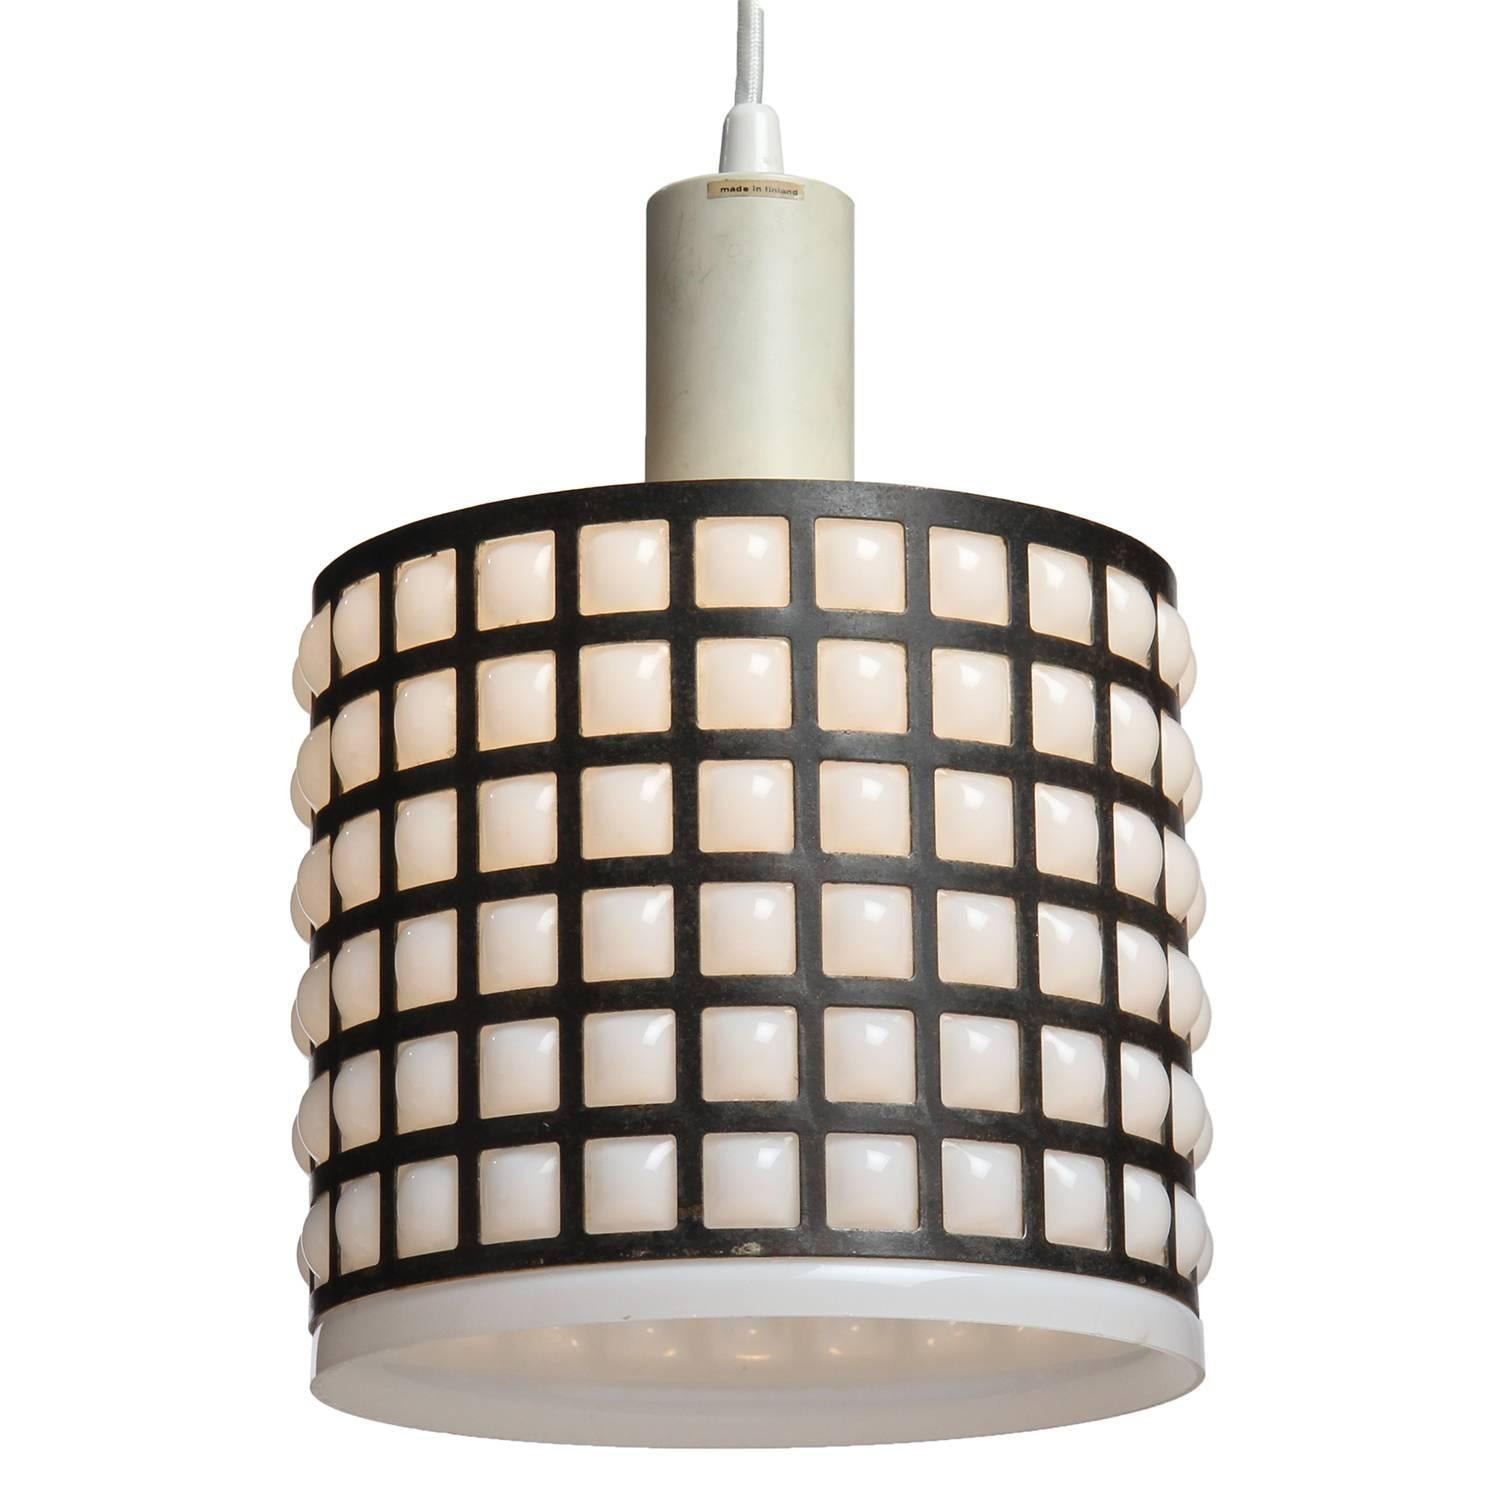 A graphic and unusual cylindrical ceiling fixture having a white glass shade blown into a patinated bronze grid.